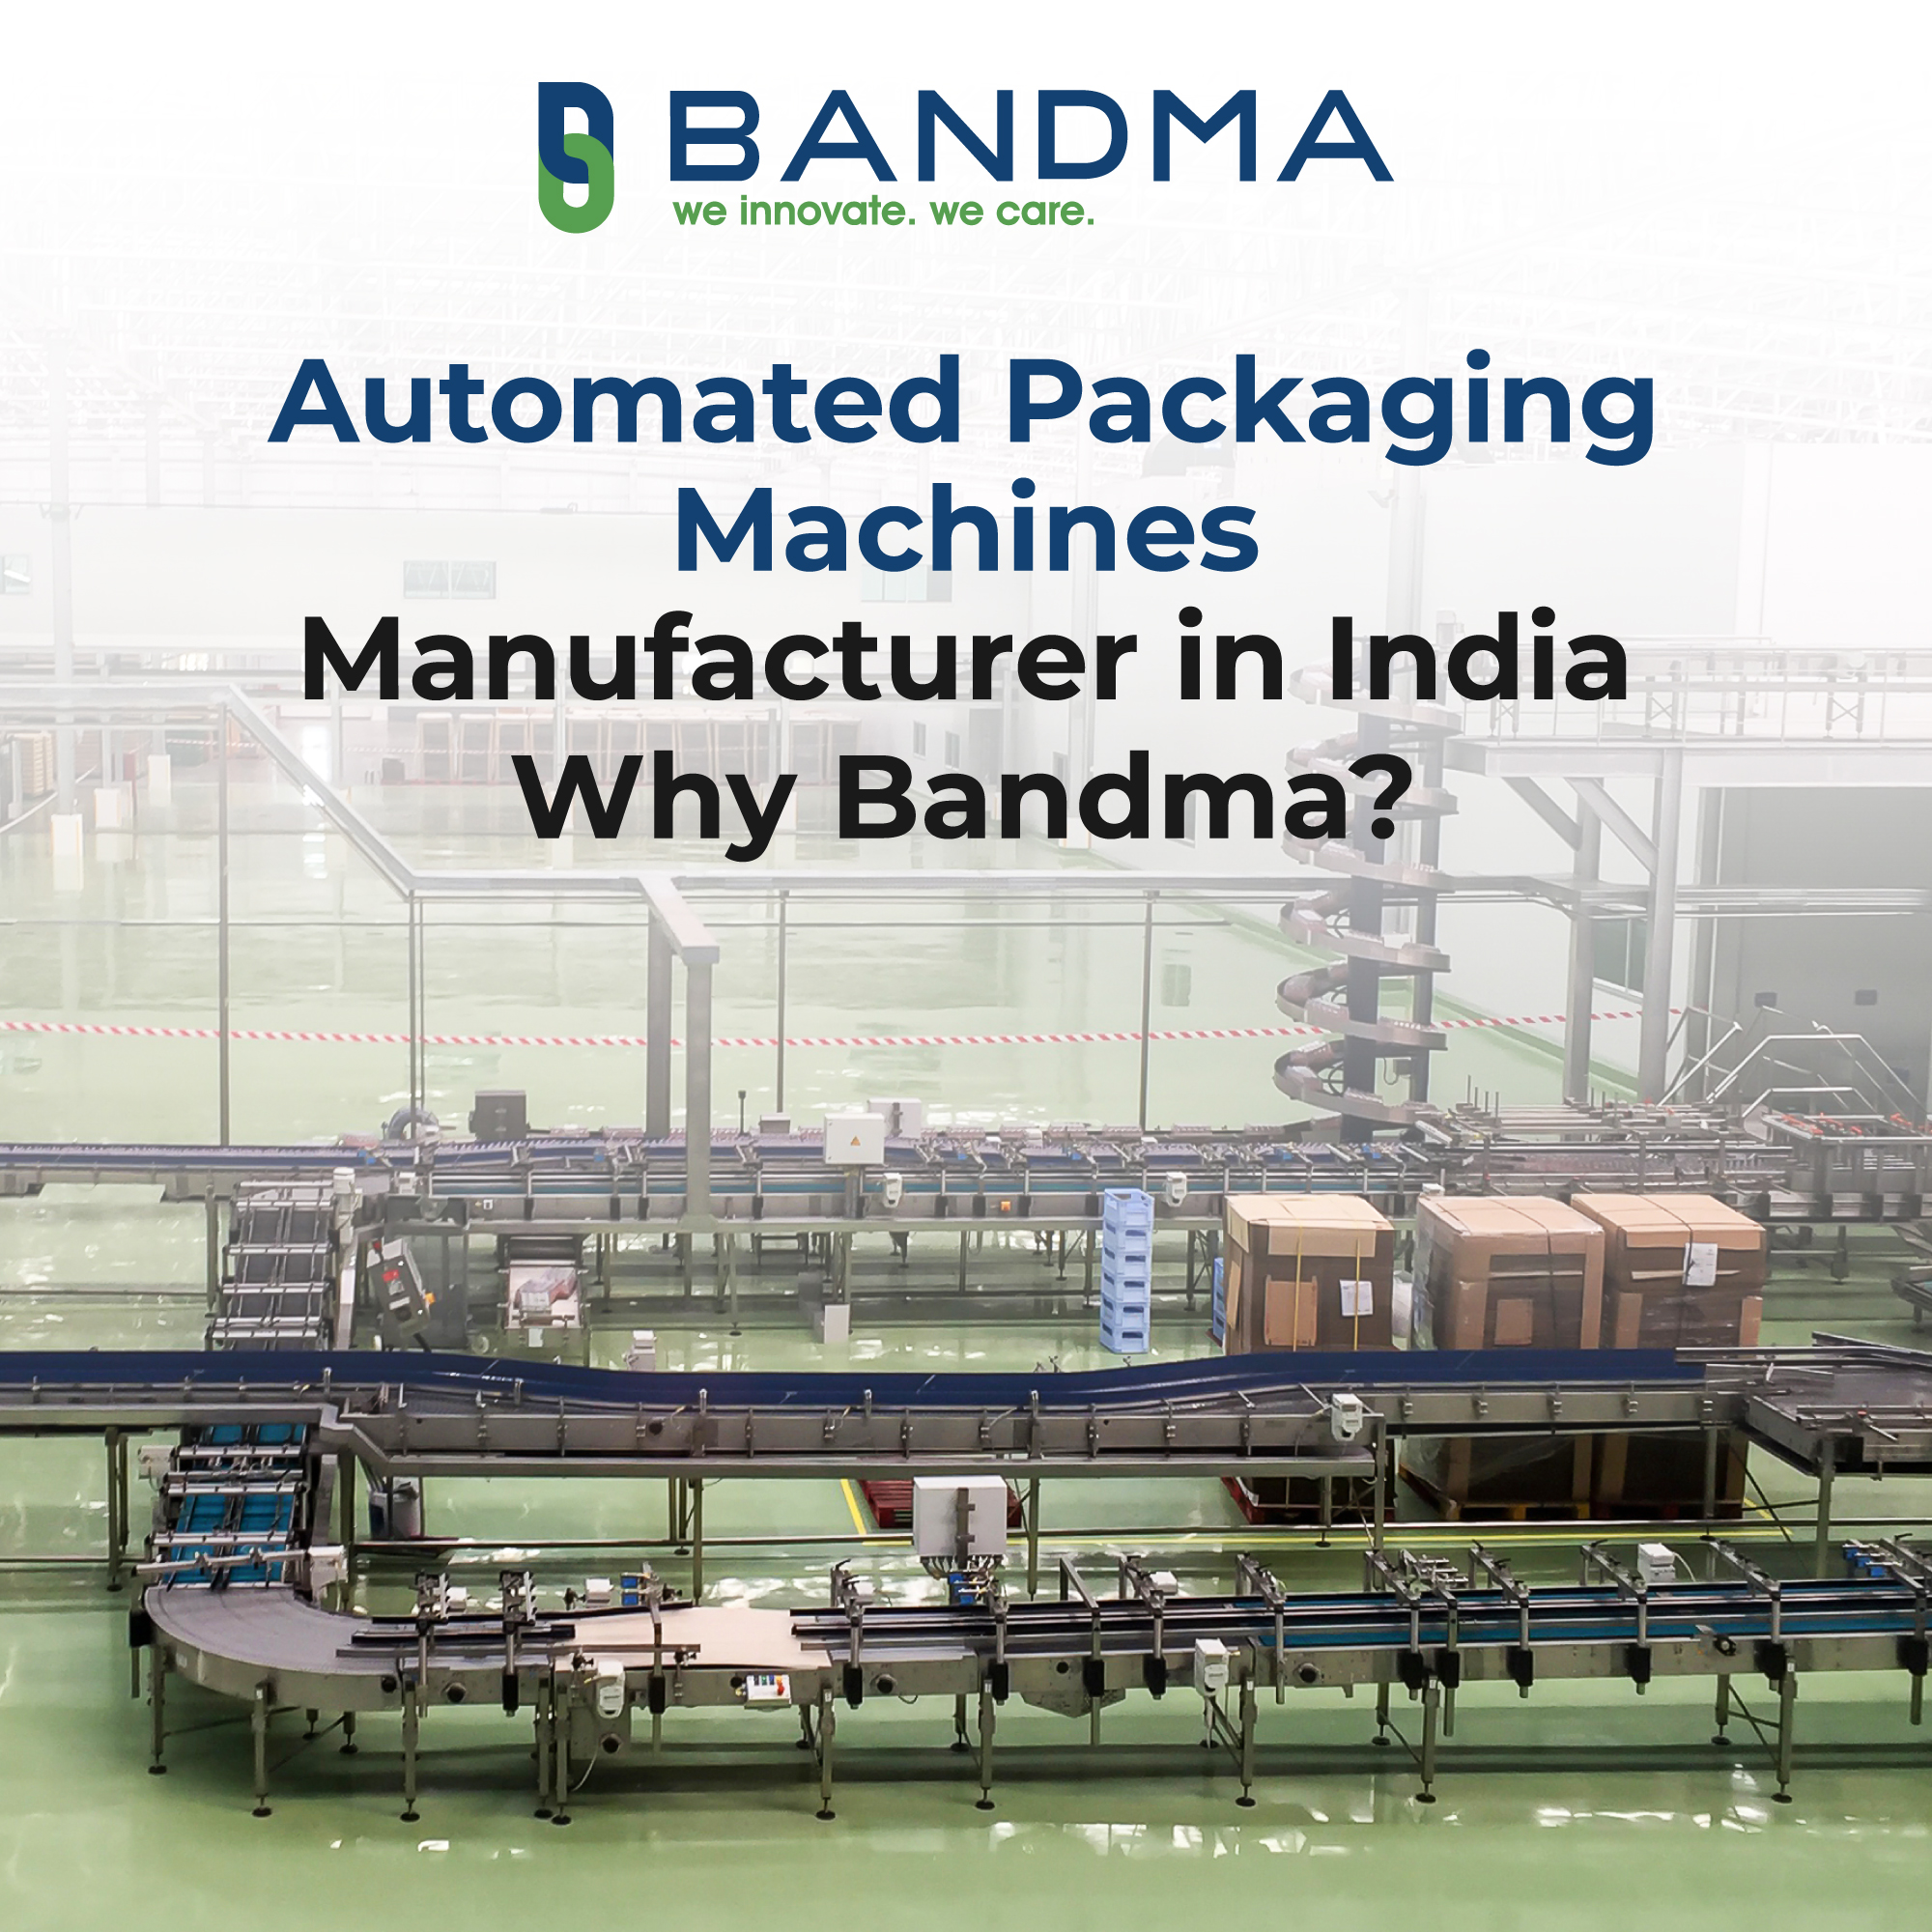 Automated Packaging Machines Manufacturer in India - Why Bandma?